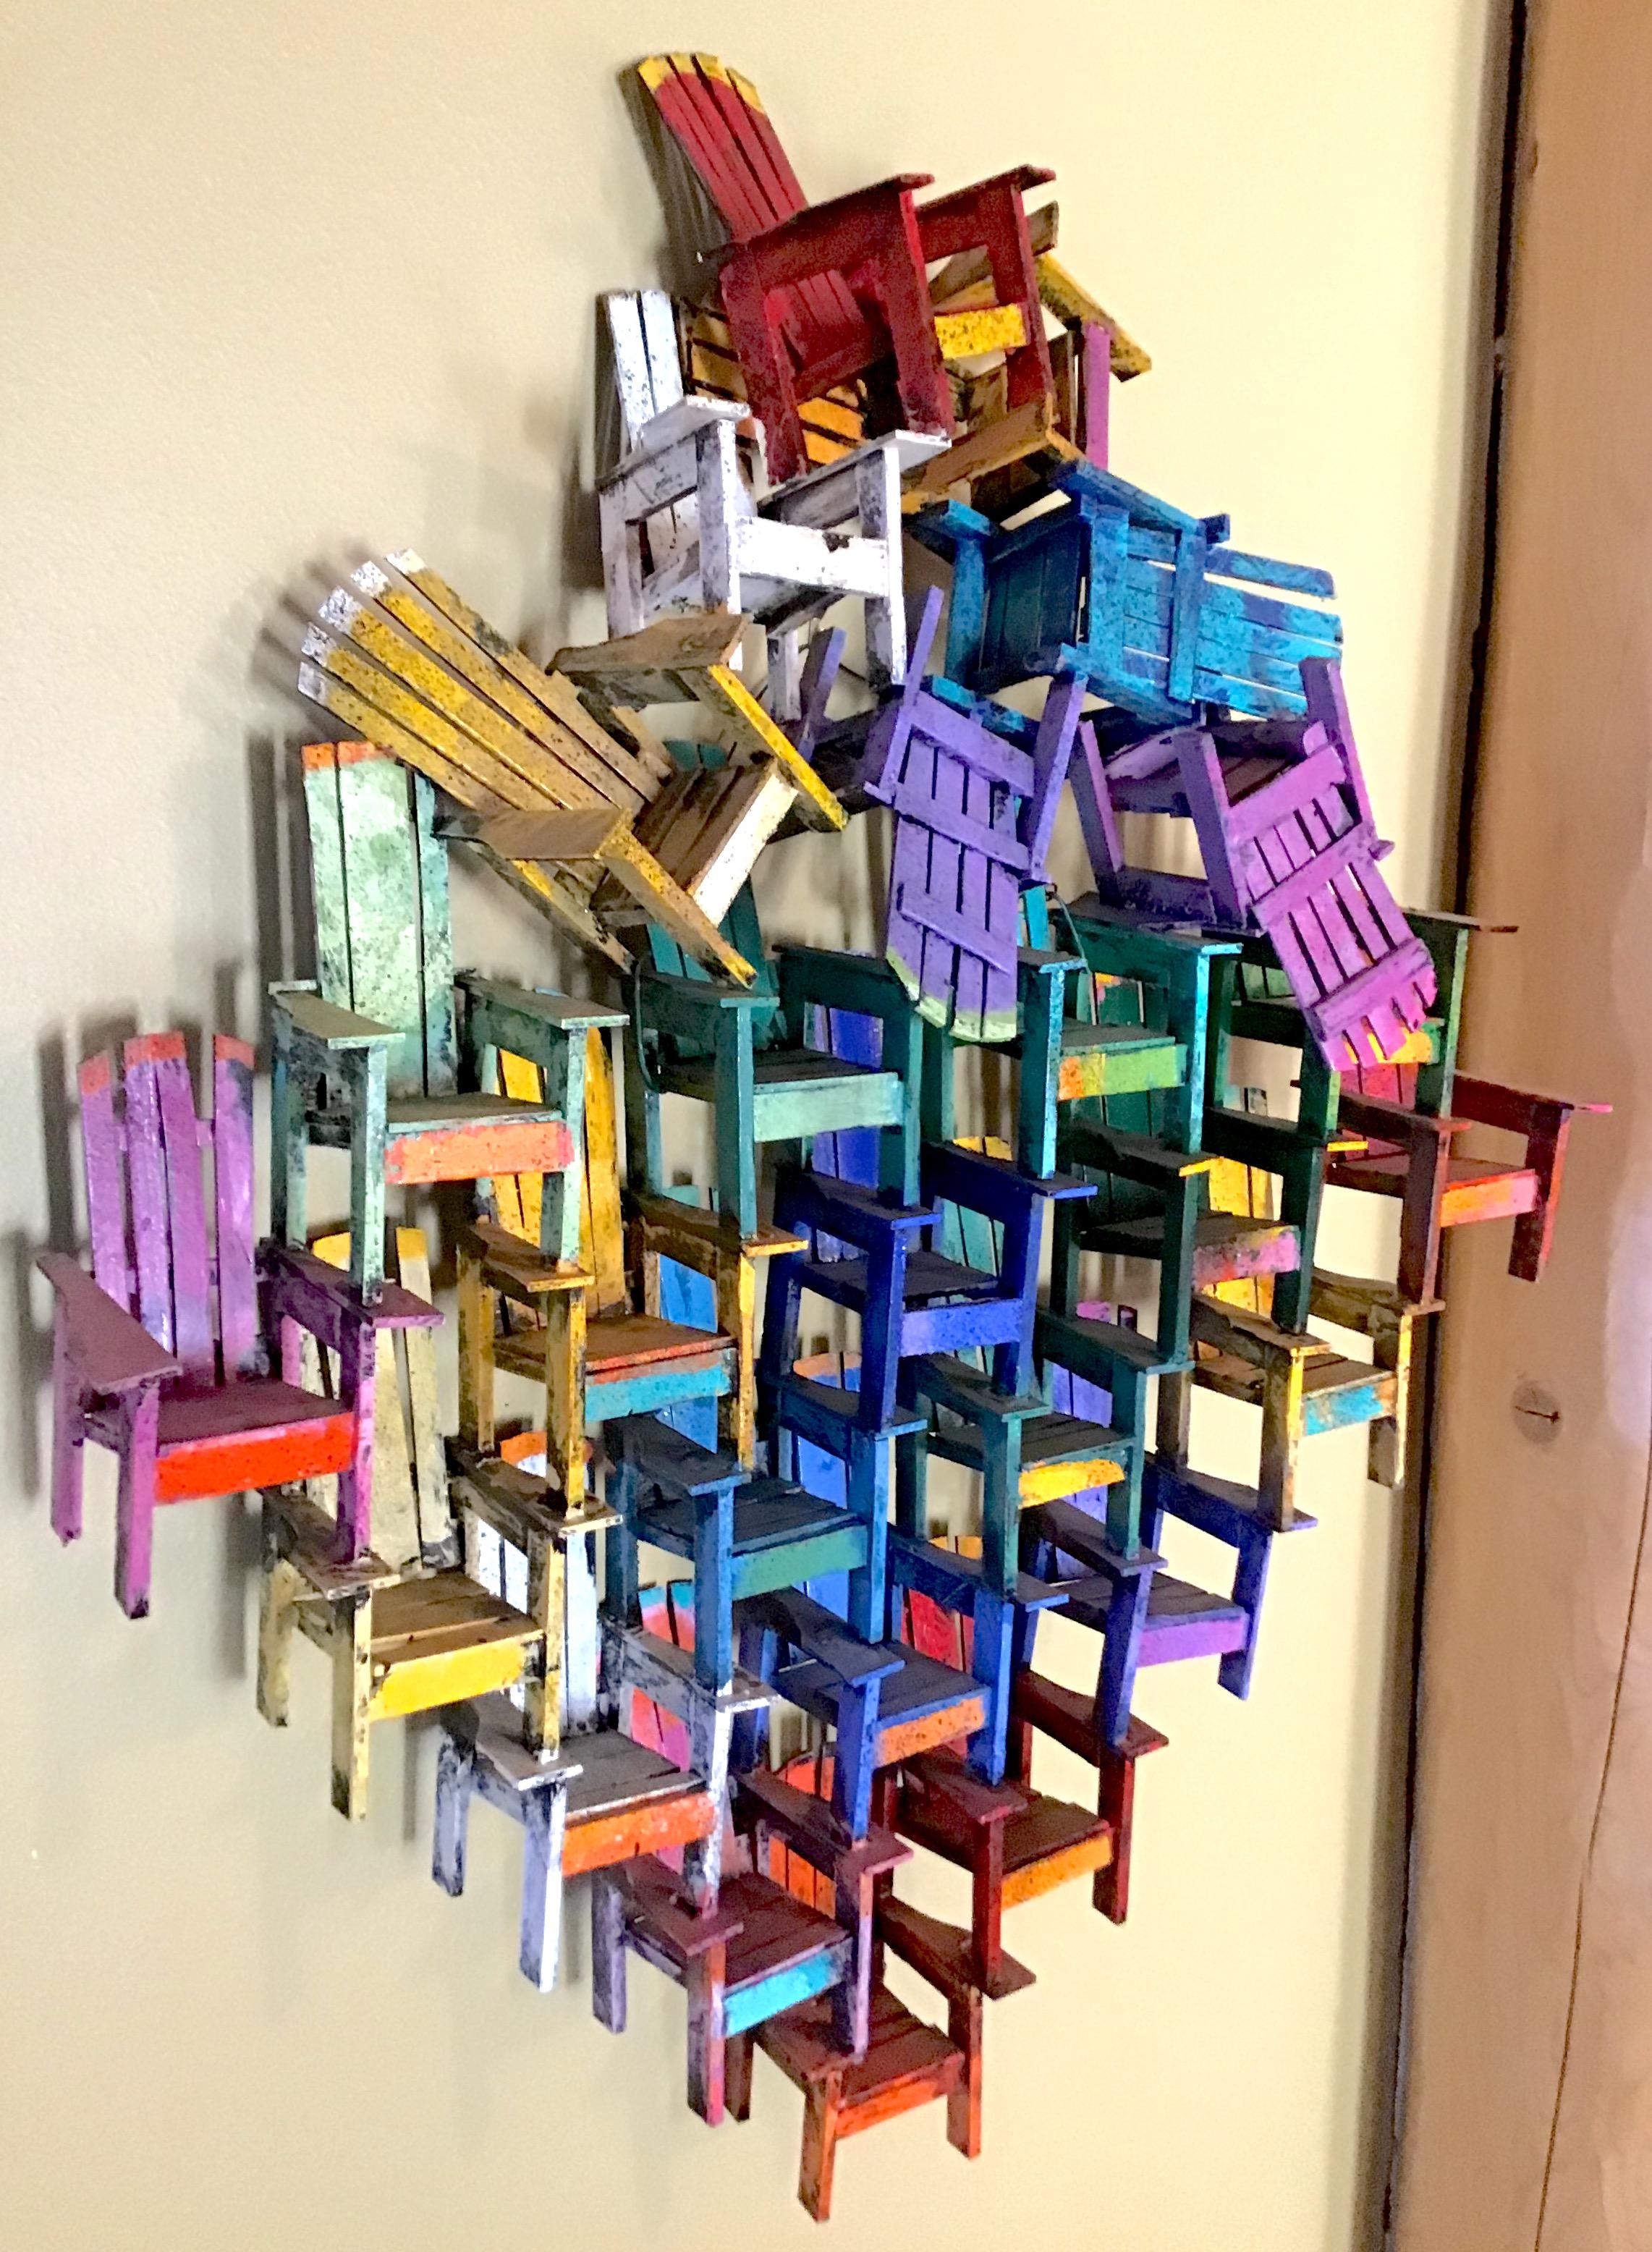 Colorful Adirondack chair wall sculpture

Paul Jacobsen used everyday objects, such as chairs, cars, airplanes, trains, motorcycles and puzzles, all built from scratch, and turns them into very desirable works of art. Among his most famous works are